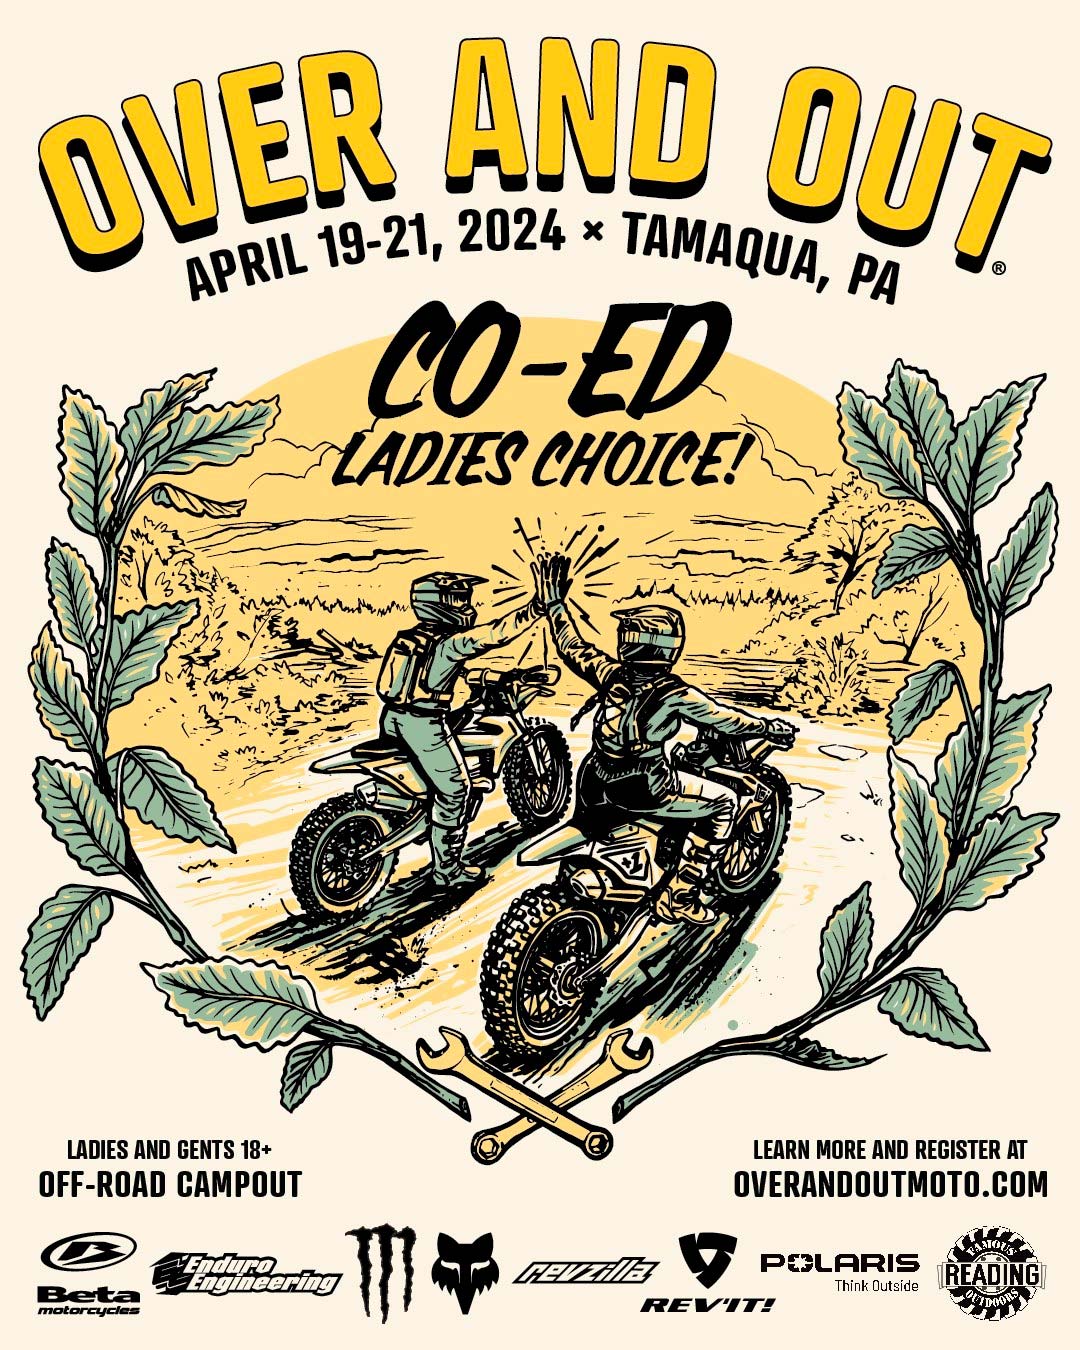 Over and Out CO-ED Ladies’ Choice 2024 Off-Road Campout